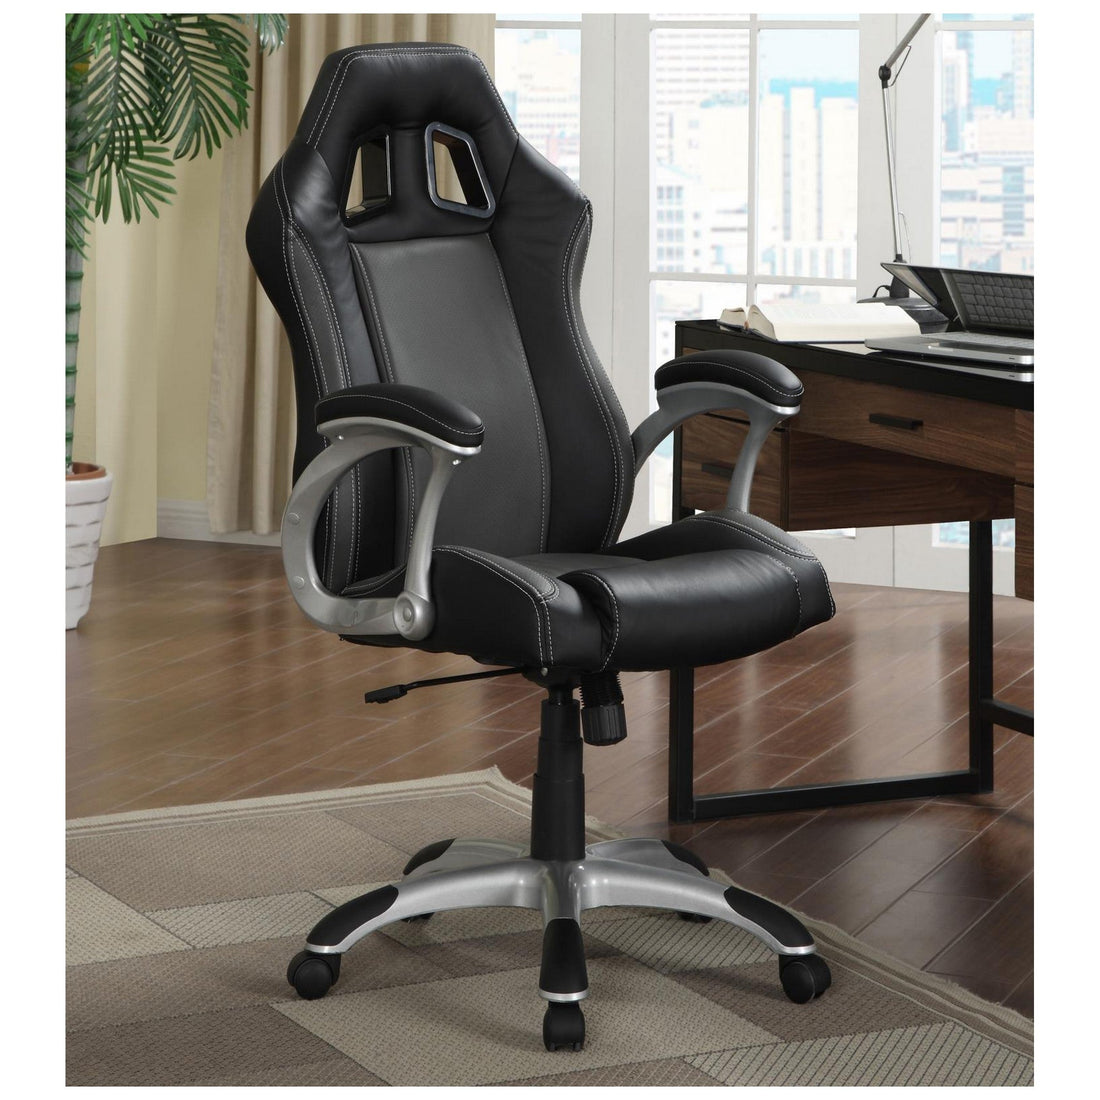 Roger Adjustable Height Office Chair Black and Grey 800046